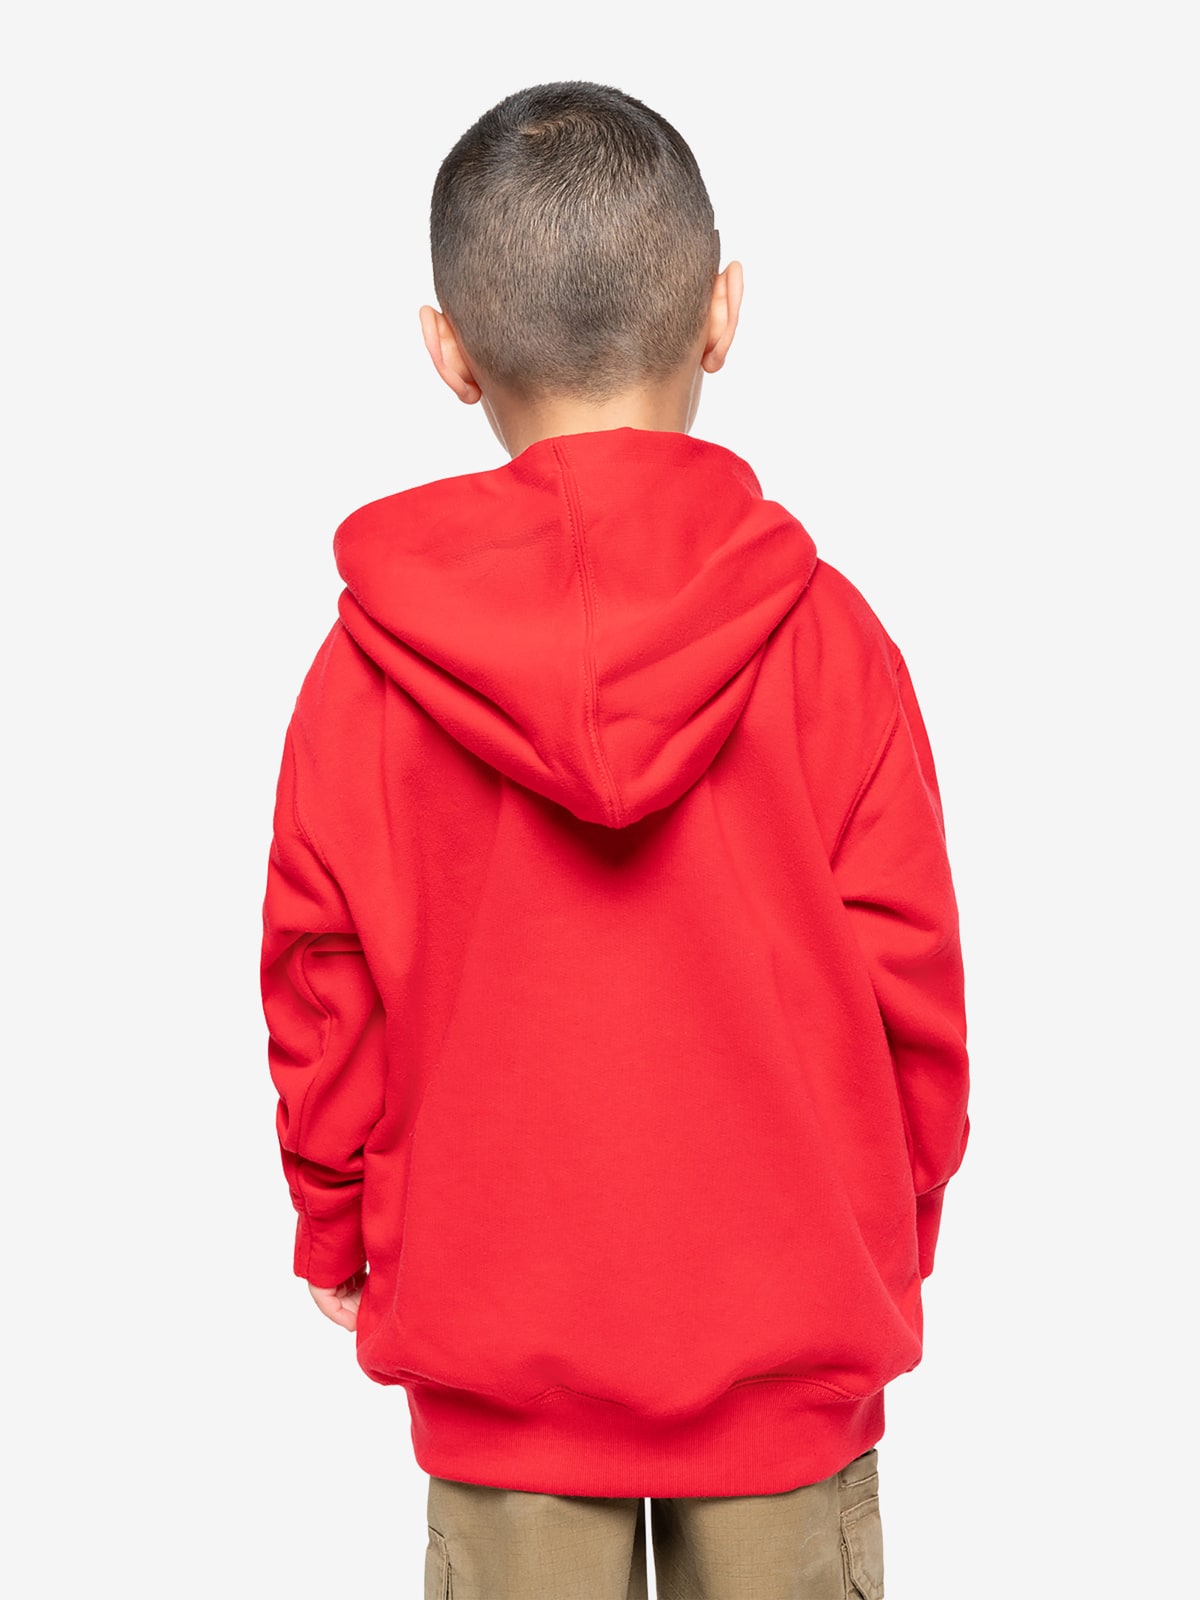 Insect Shield Toddler Zip Hoodie